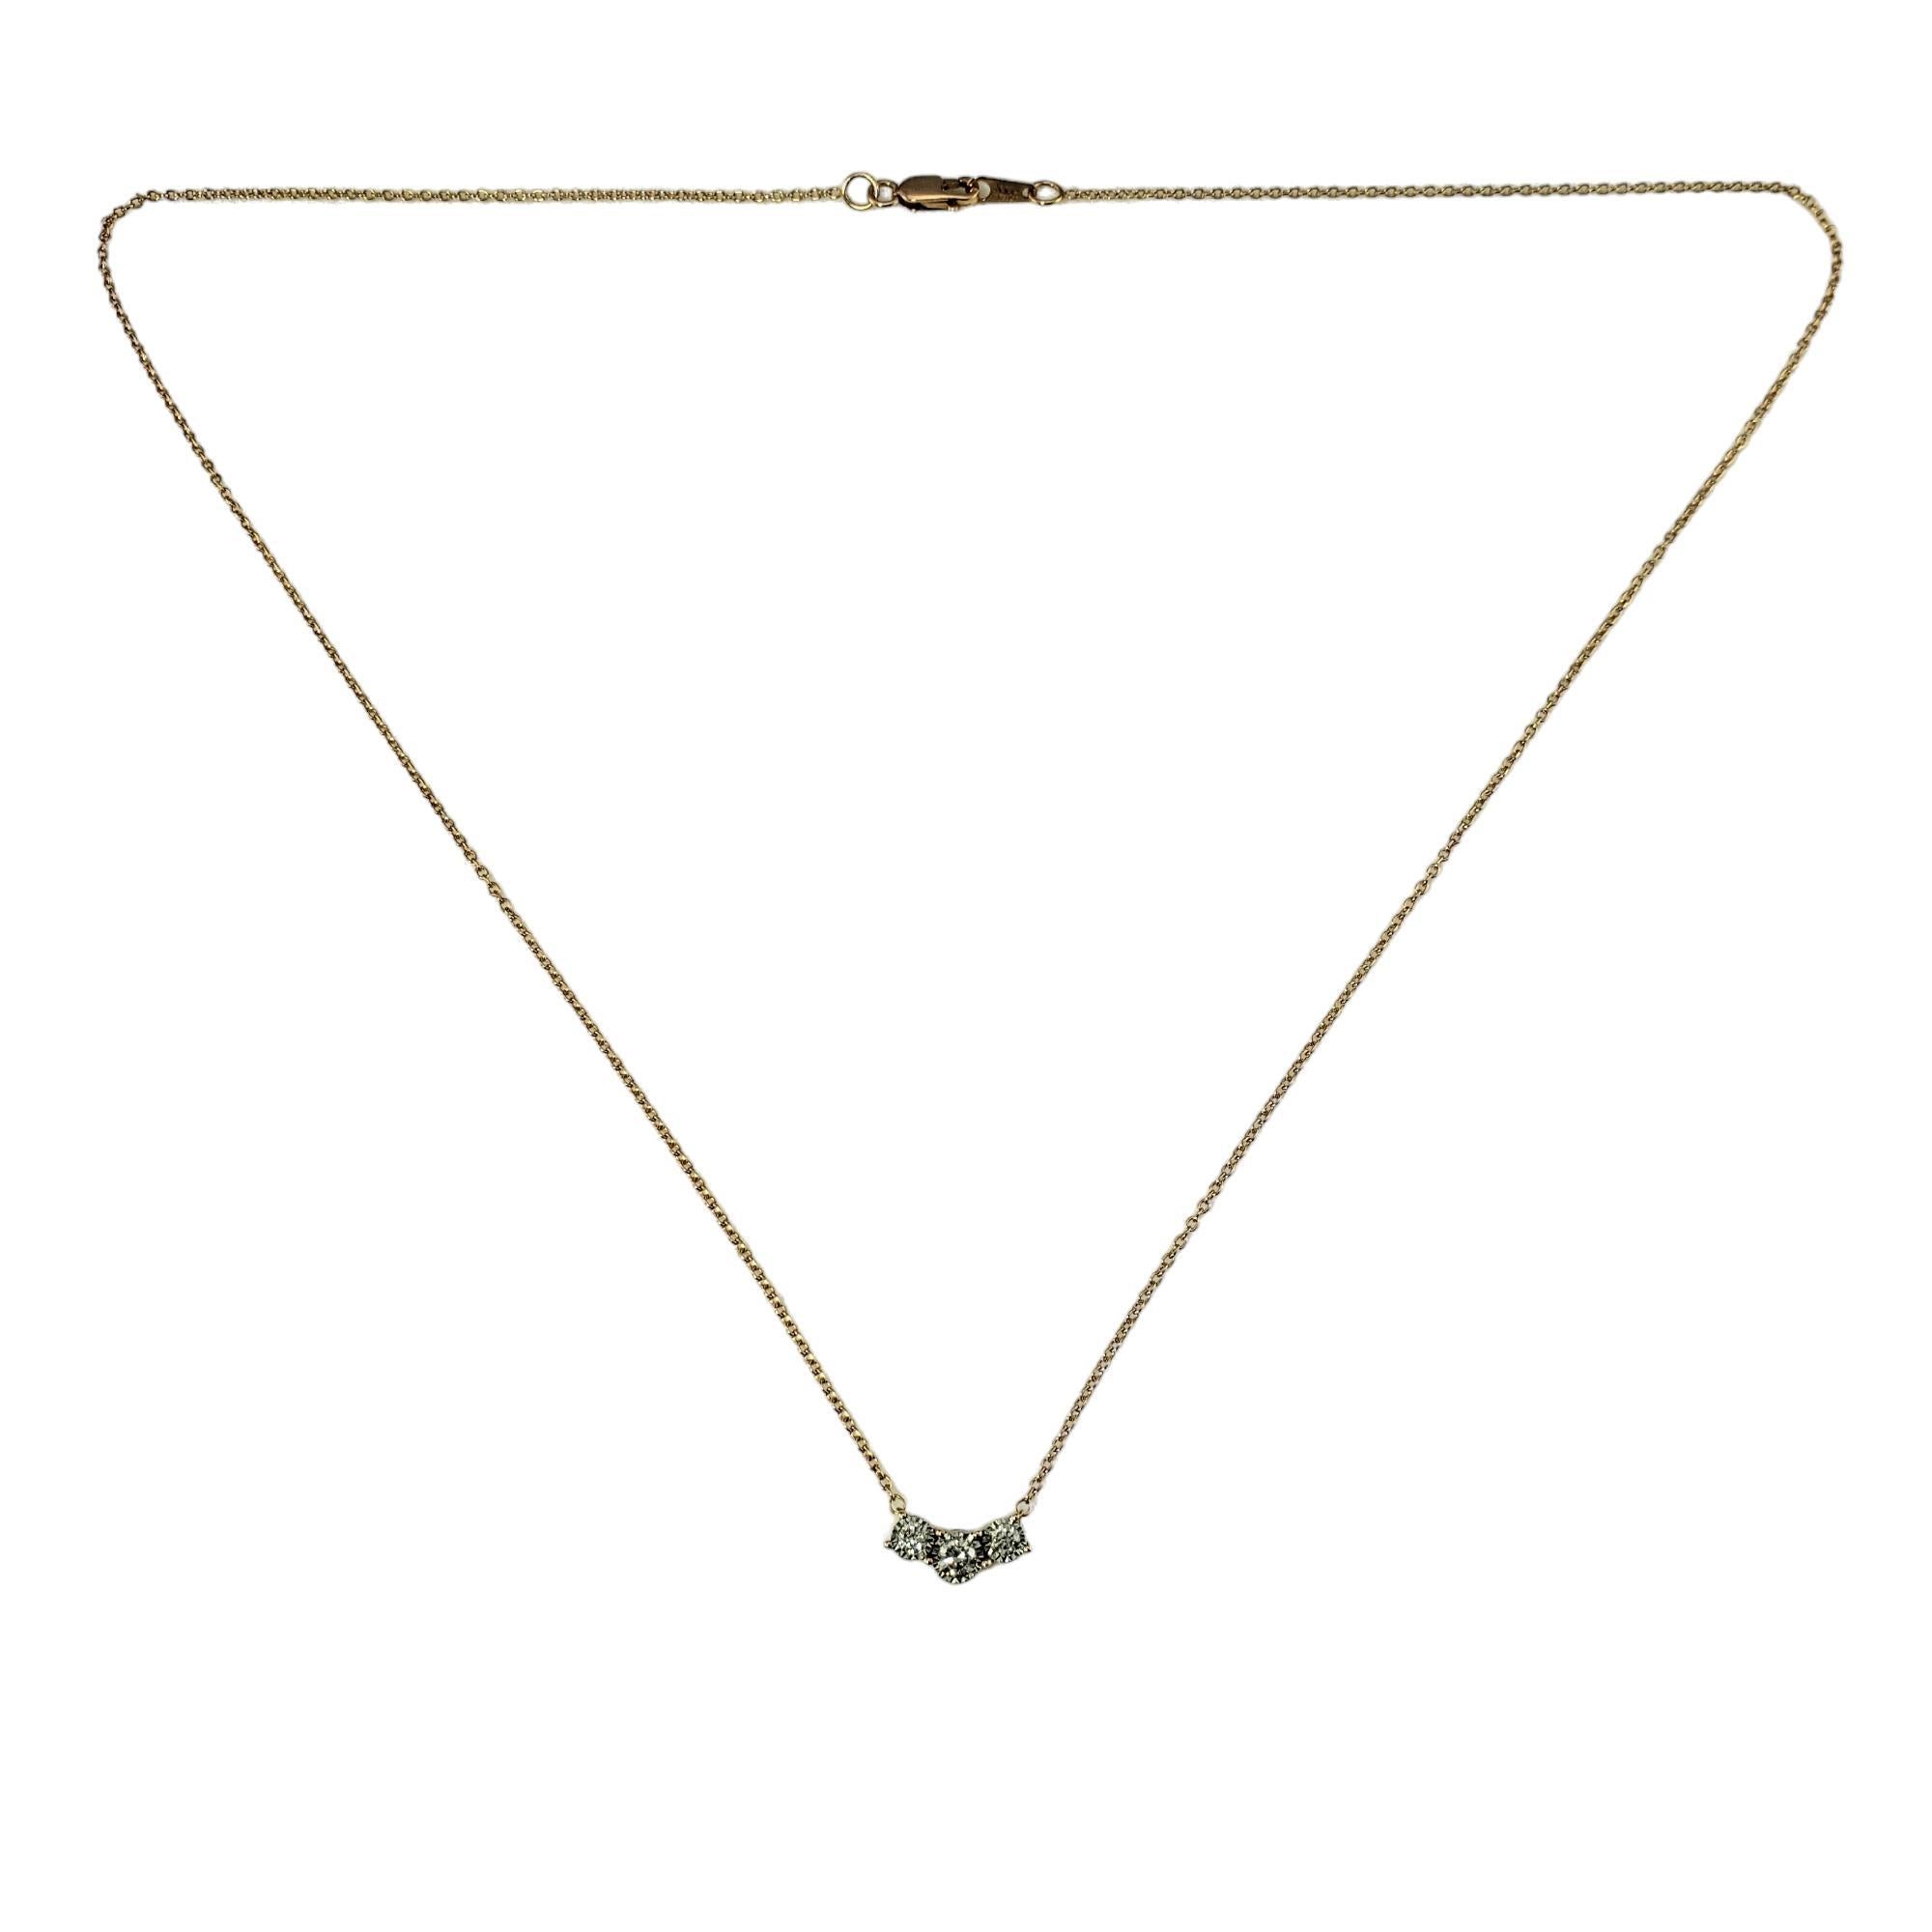 Vintage 10K Rose Gold Diamond Pendant Necklace-

This sparkling necklace features three round brilliant cut diamonds set in classic 10K rose gold.

Approximate total diamond weight:  .20 ct.

Diamond color: I

Diamond clarity: I1

Size: 18.25